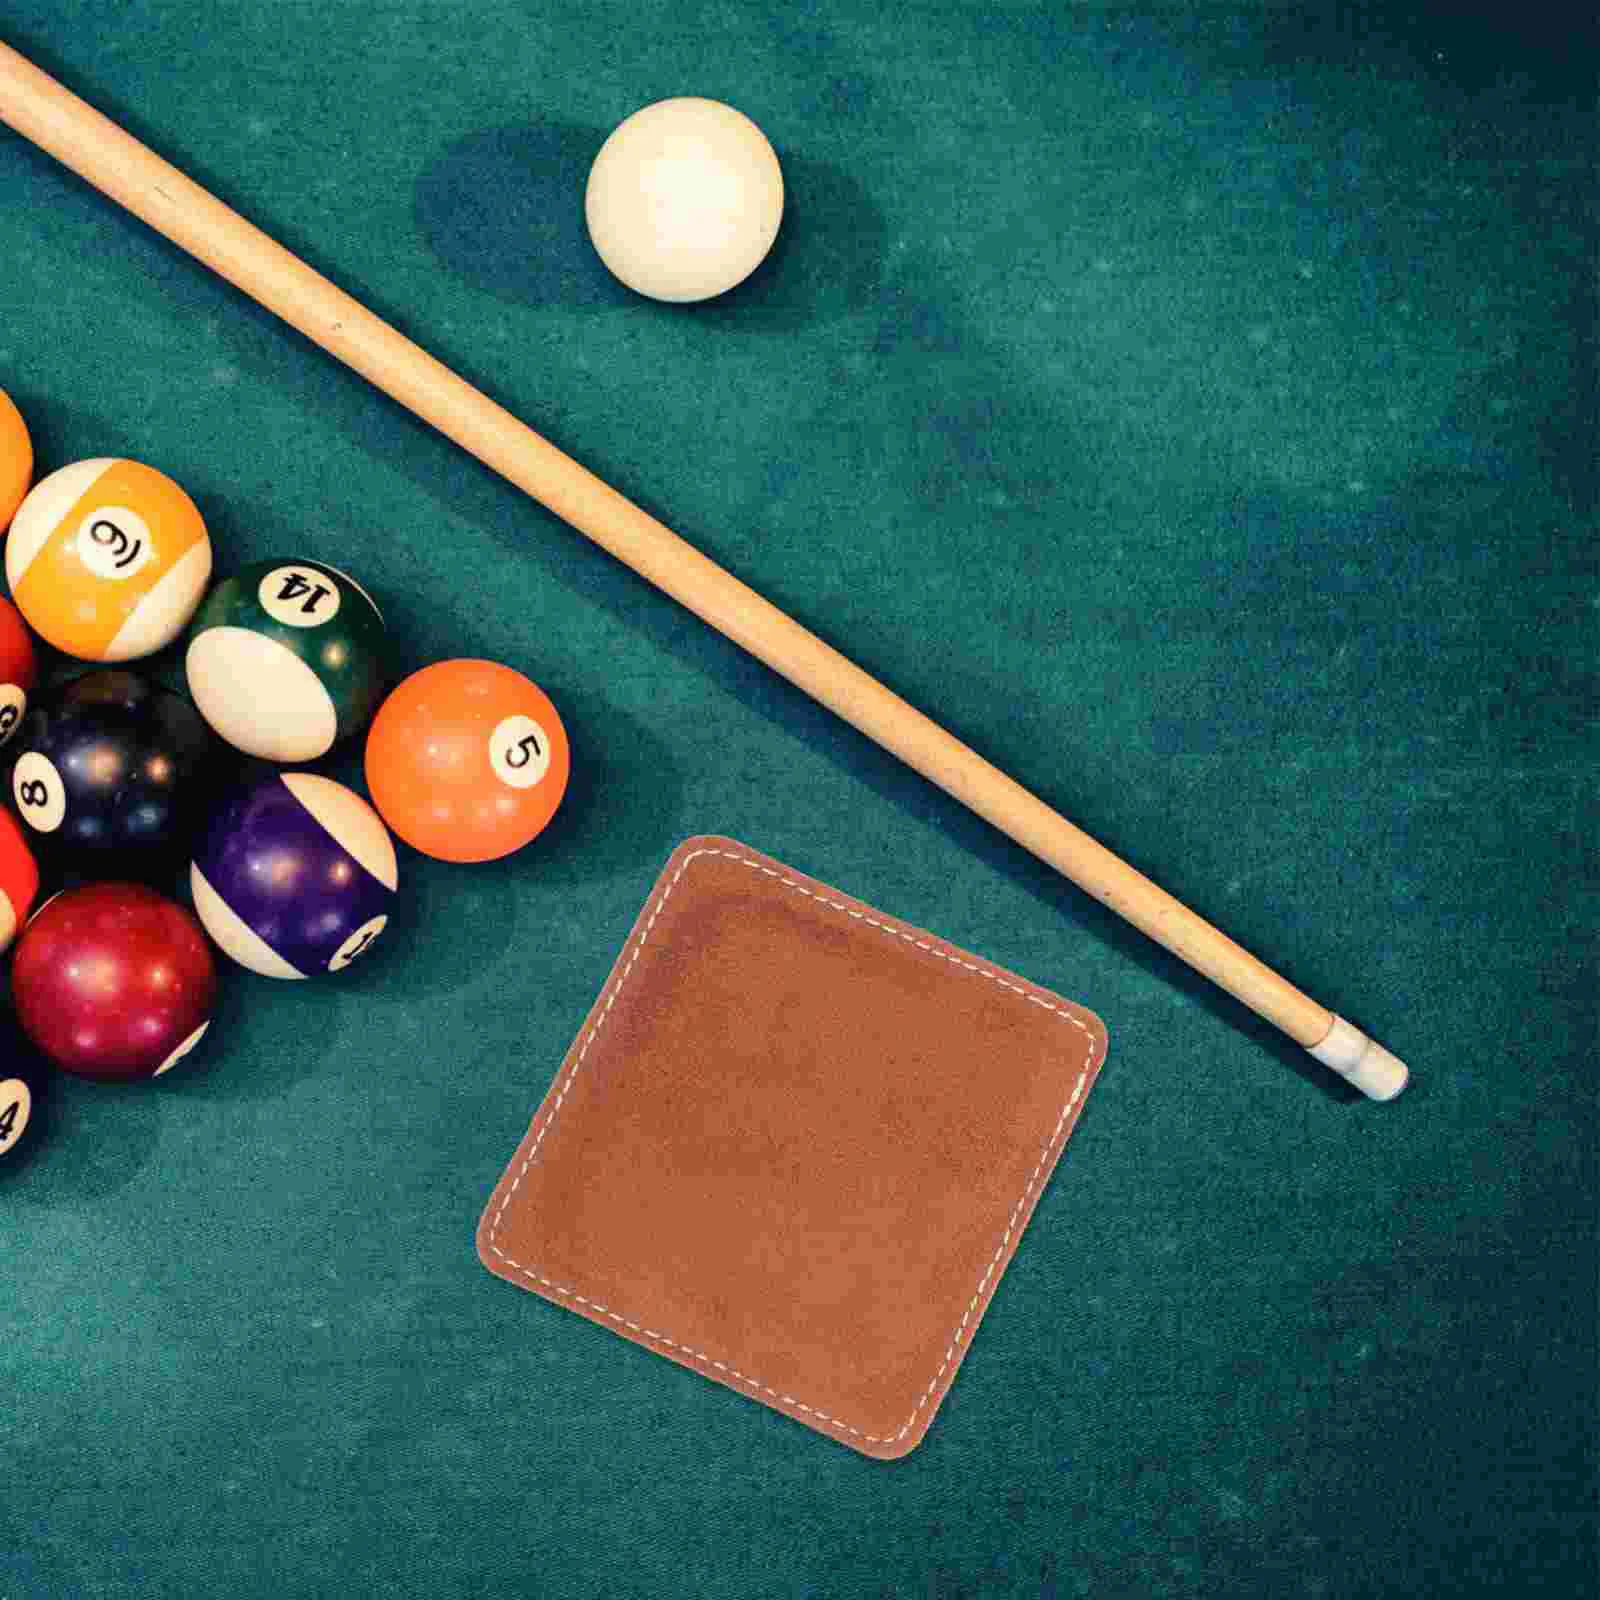 wipe the soft club rough on surface brown snooker stick towel towels pool cue accessories rough surface cleaning Billiard Pole Cleaners Wipe The Soft Club Rough on Surface (brown) Infant Towel Cleaning for Snooker Stick